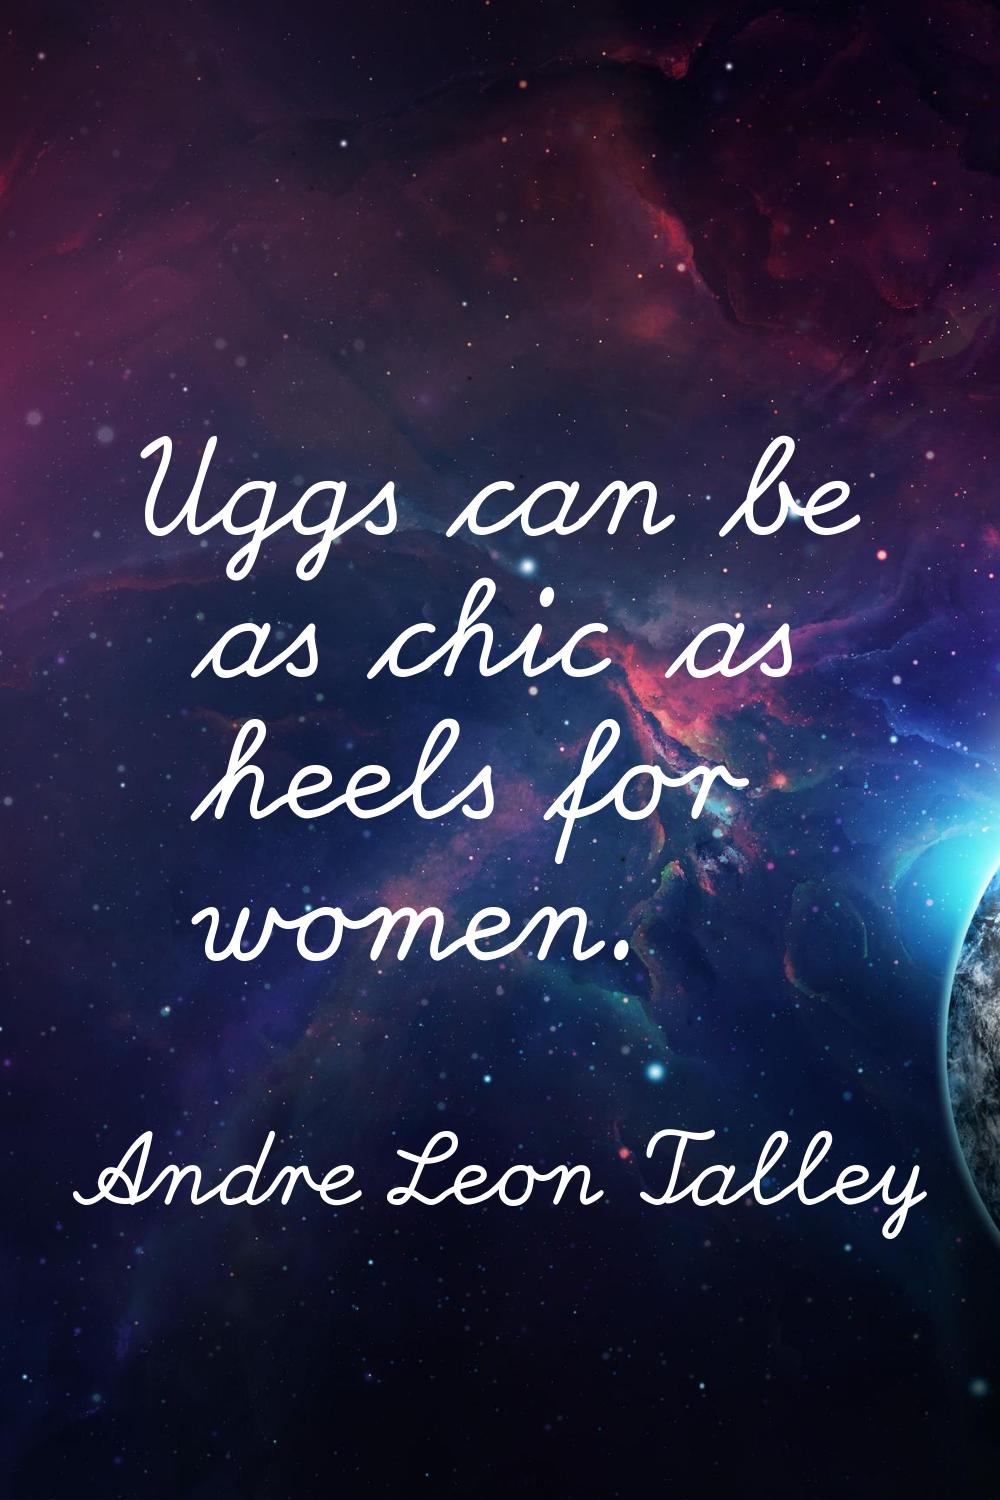 Uggs can be as chic as heels for women.